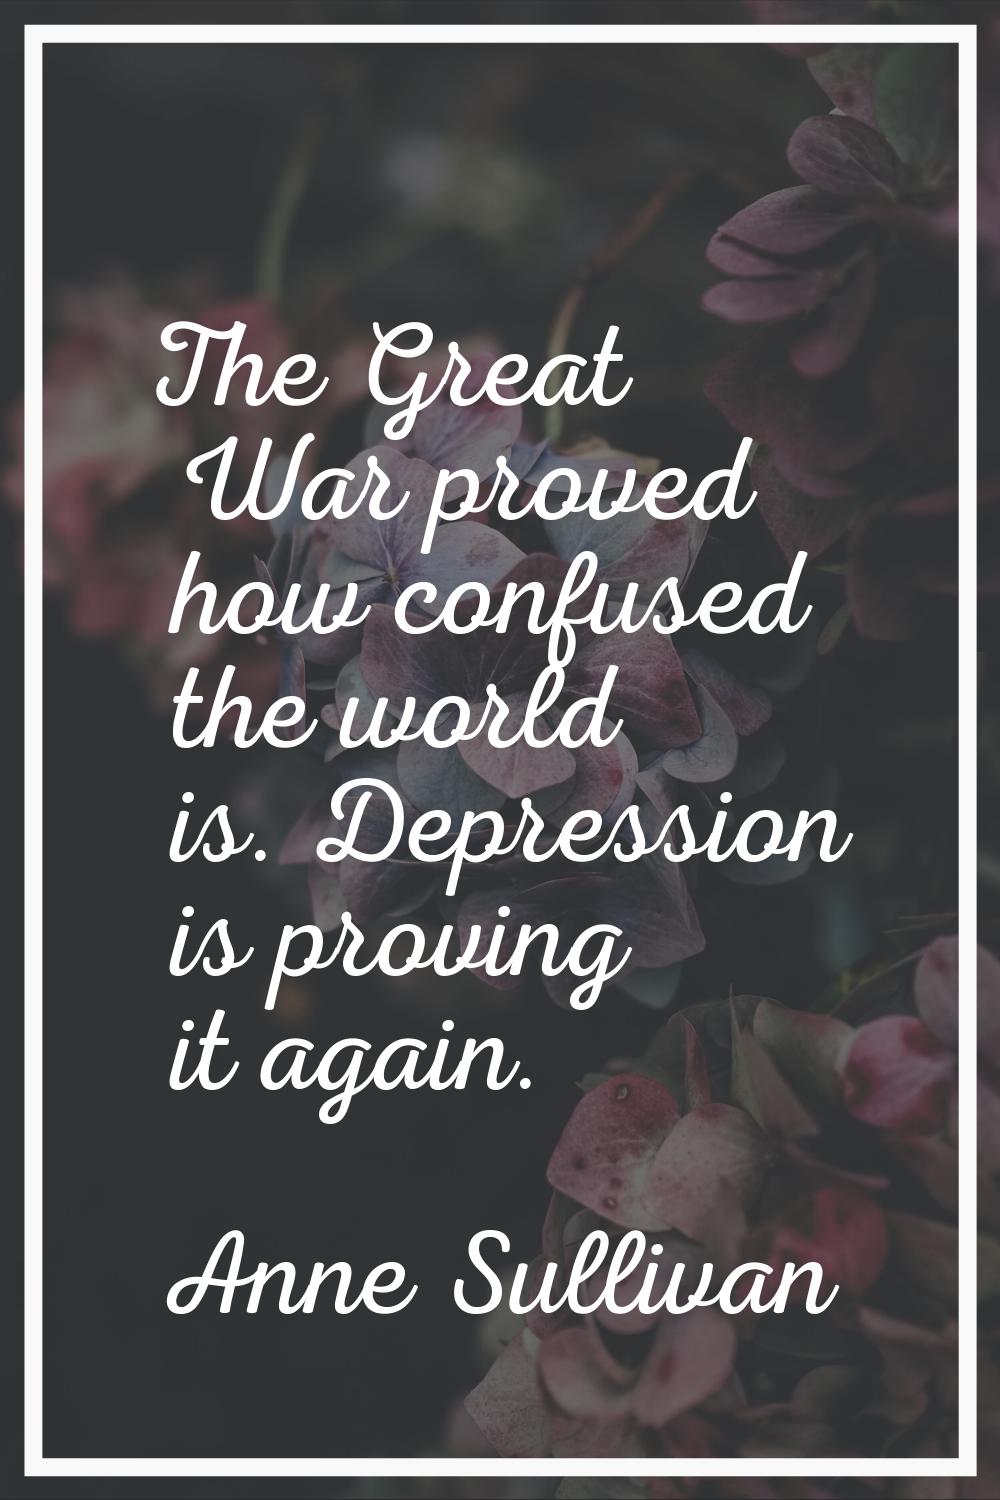 The Great War proved how confused the world is. Depression is proving it again.